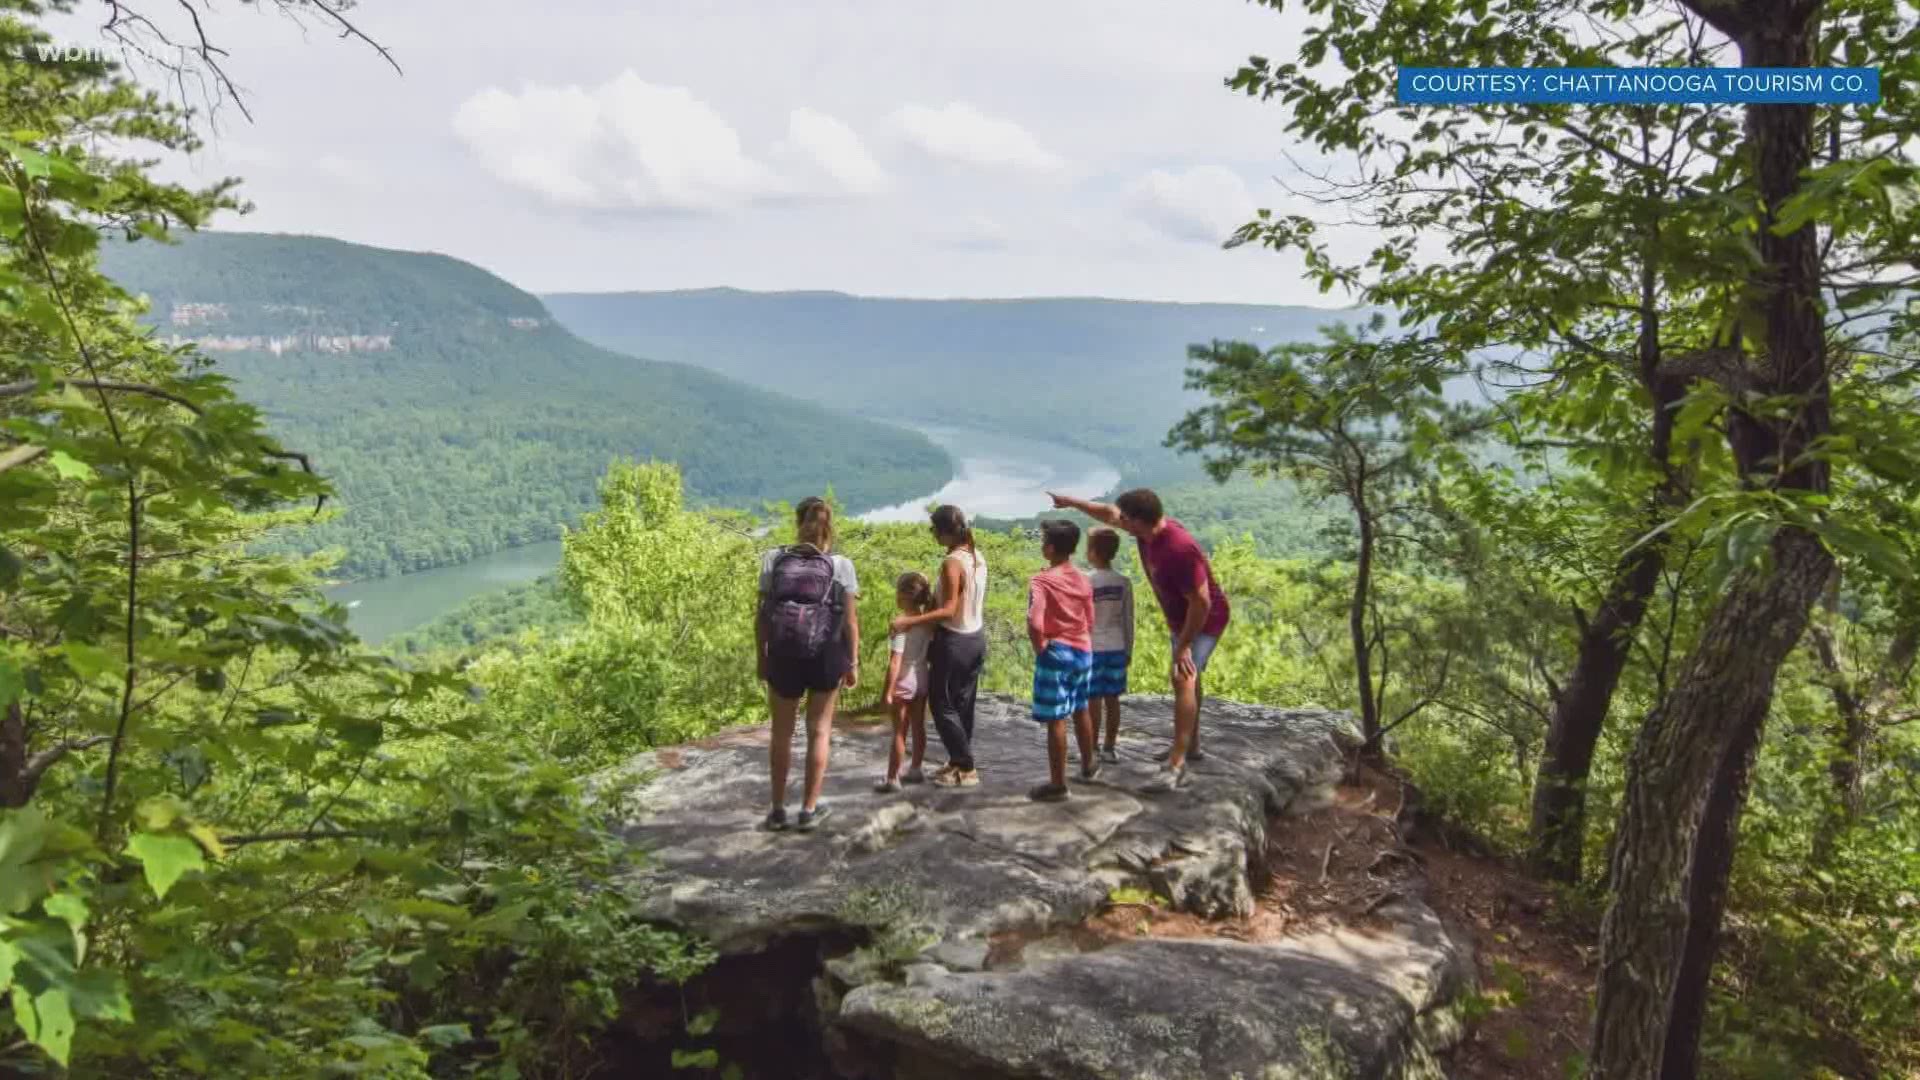 Spring Break continues for many students across East Tennessee and if you're looking for a change of scenery, a quick trip to Chattanooga might be a good fit.